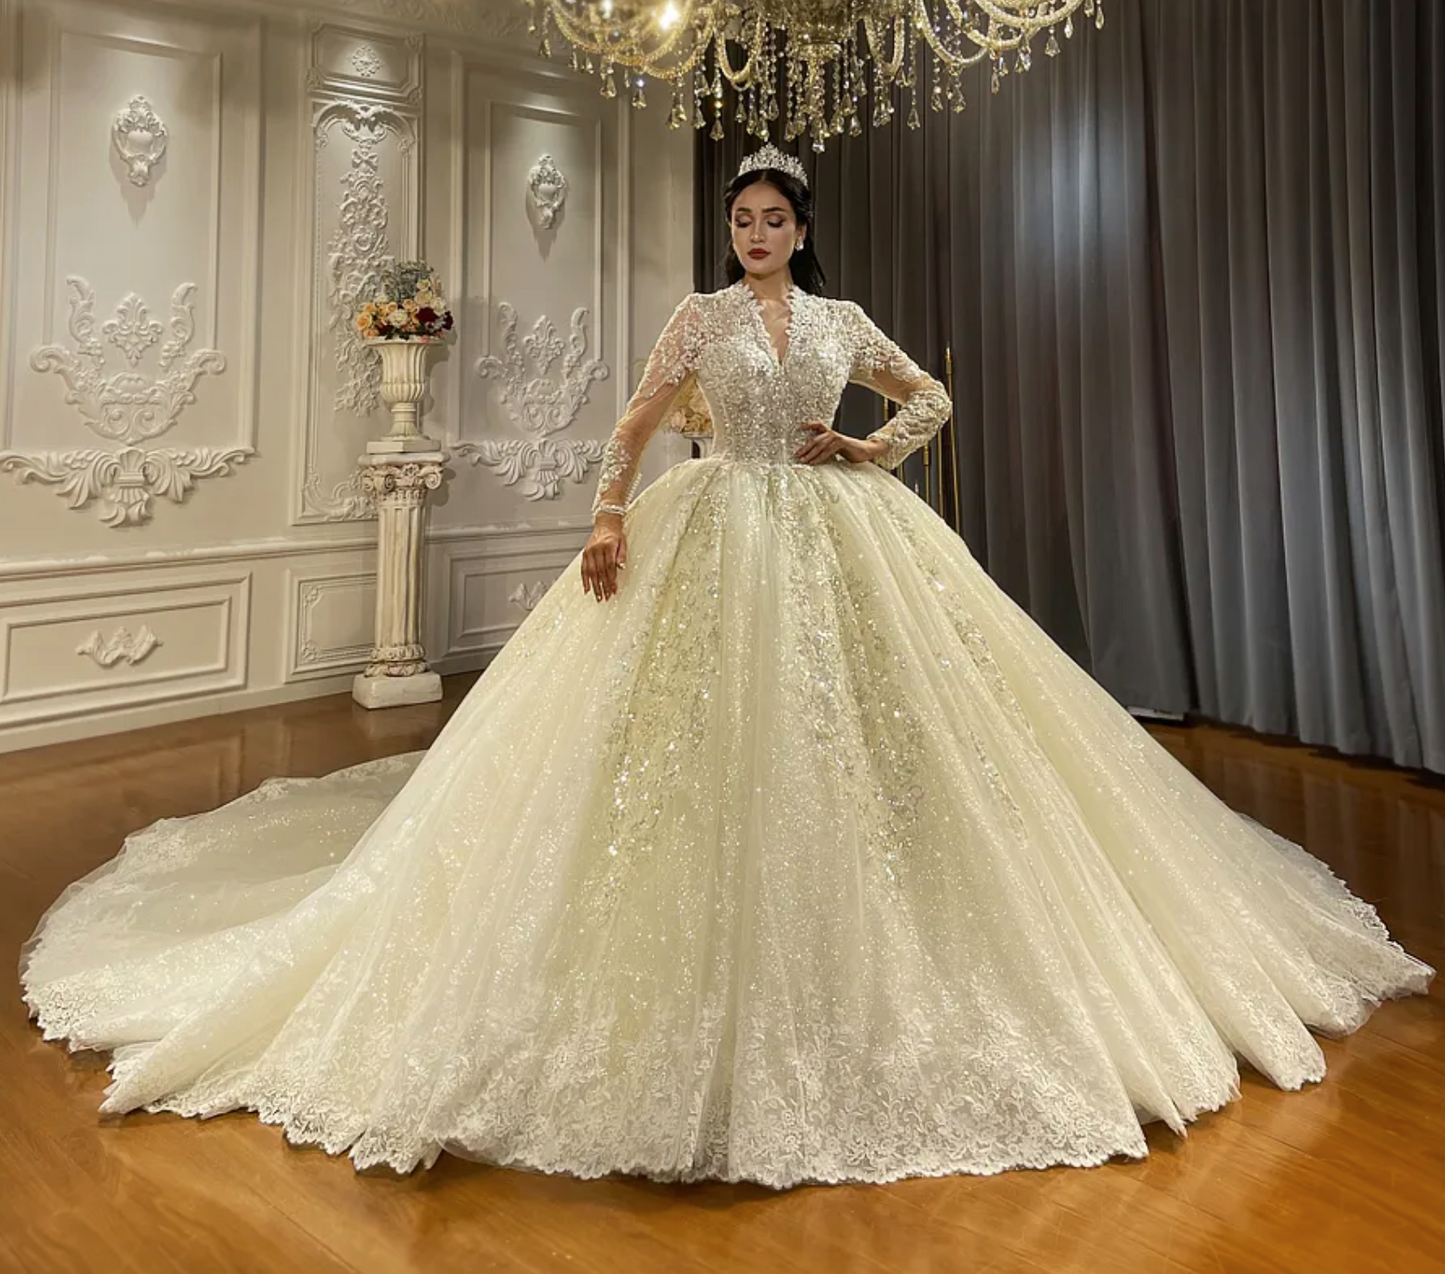 Princess Wedding Dresses Long Sleeves Beaded Lace Appliques Plus Size Ball  Gowns | eBay